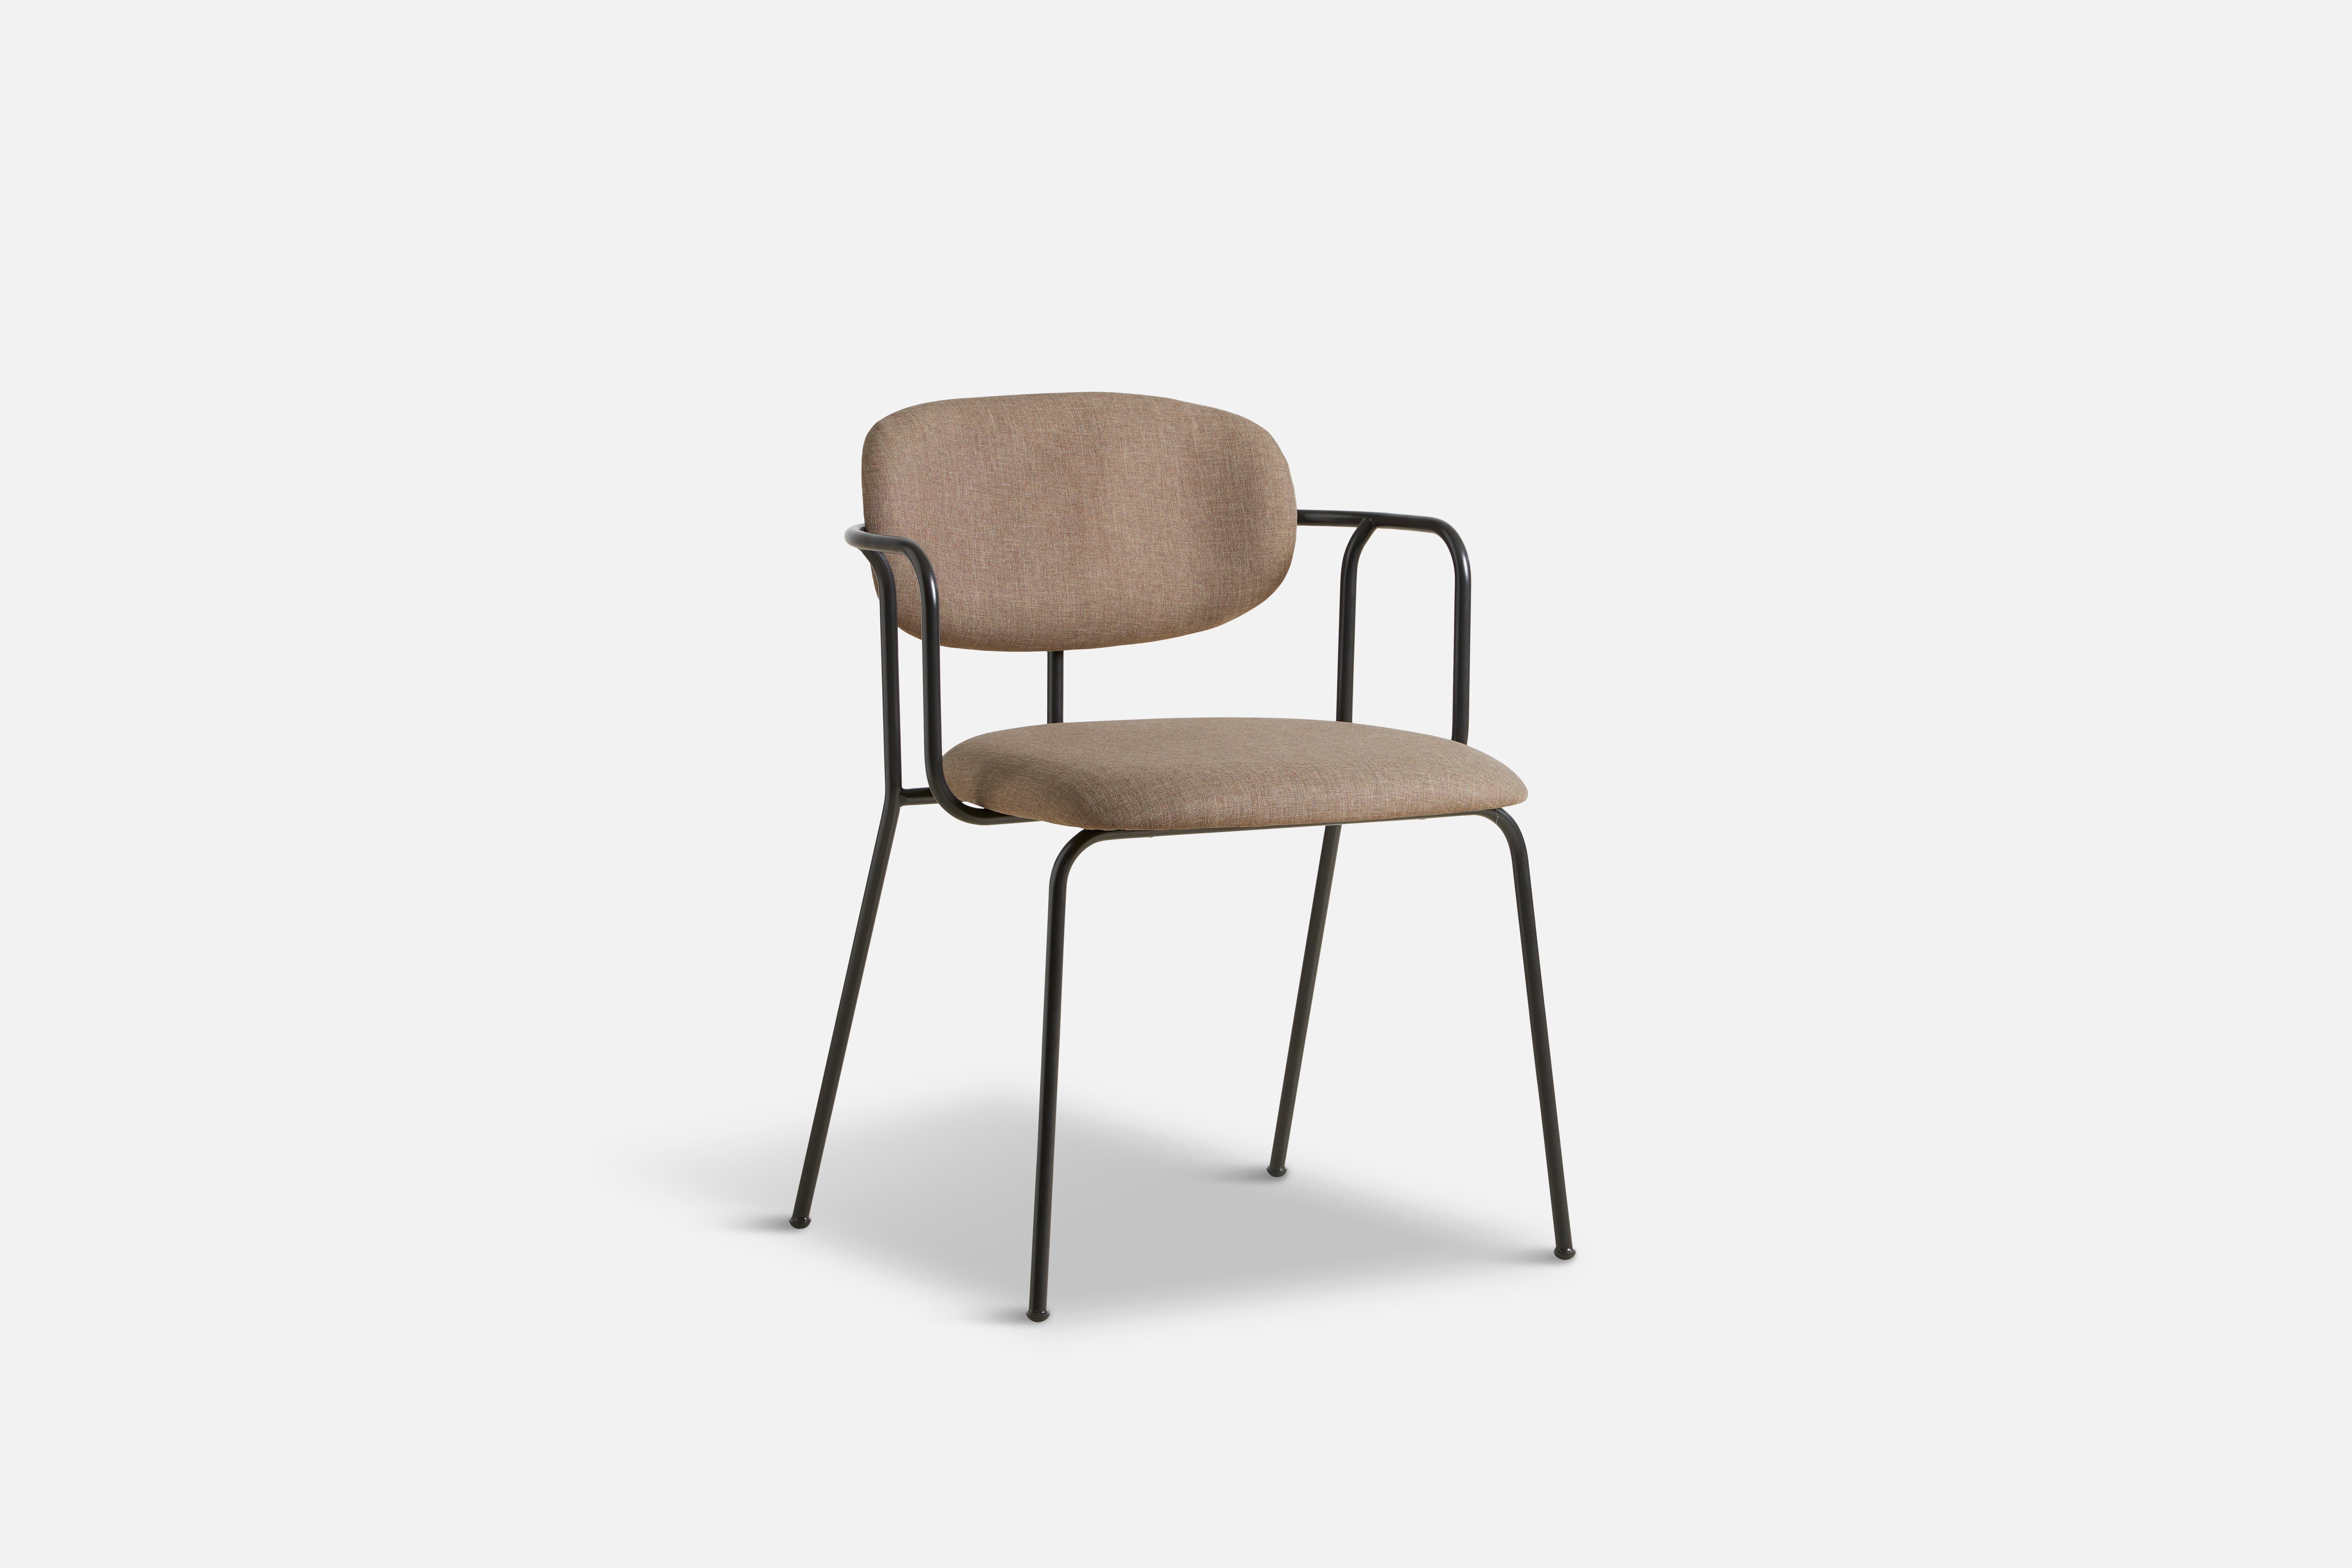 Frame Taupe dining chair by Mario Tsai Studio
Materials: Fabric, metal
Dimensions: D 53 x W 57 x H 77 cm

The Frame dining chair arose from the idea of designing a chair like you construct a small building. Strongly inspired by the stringent outline